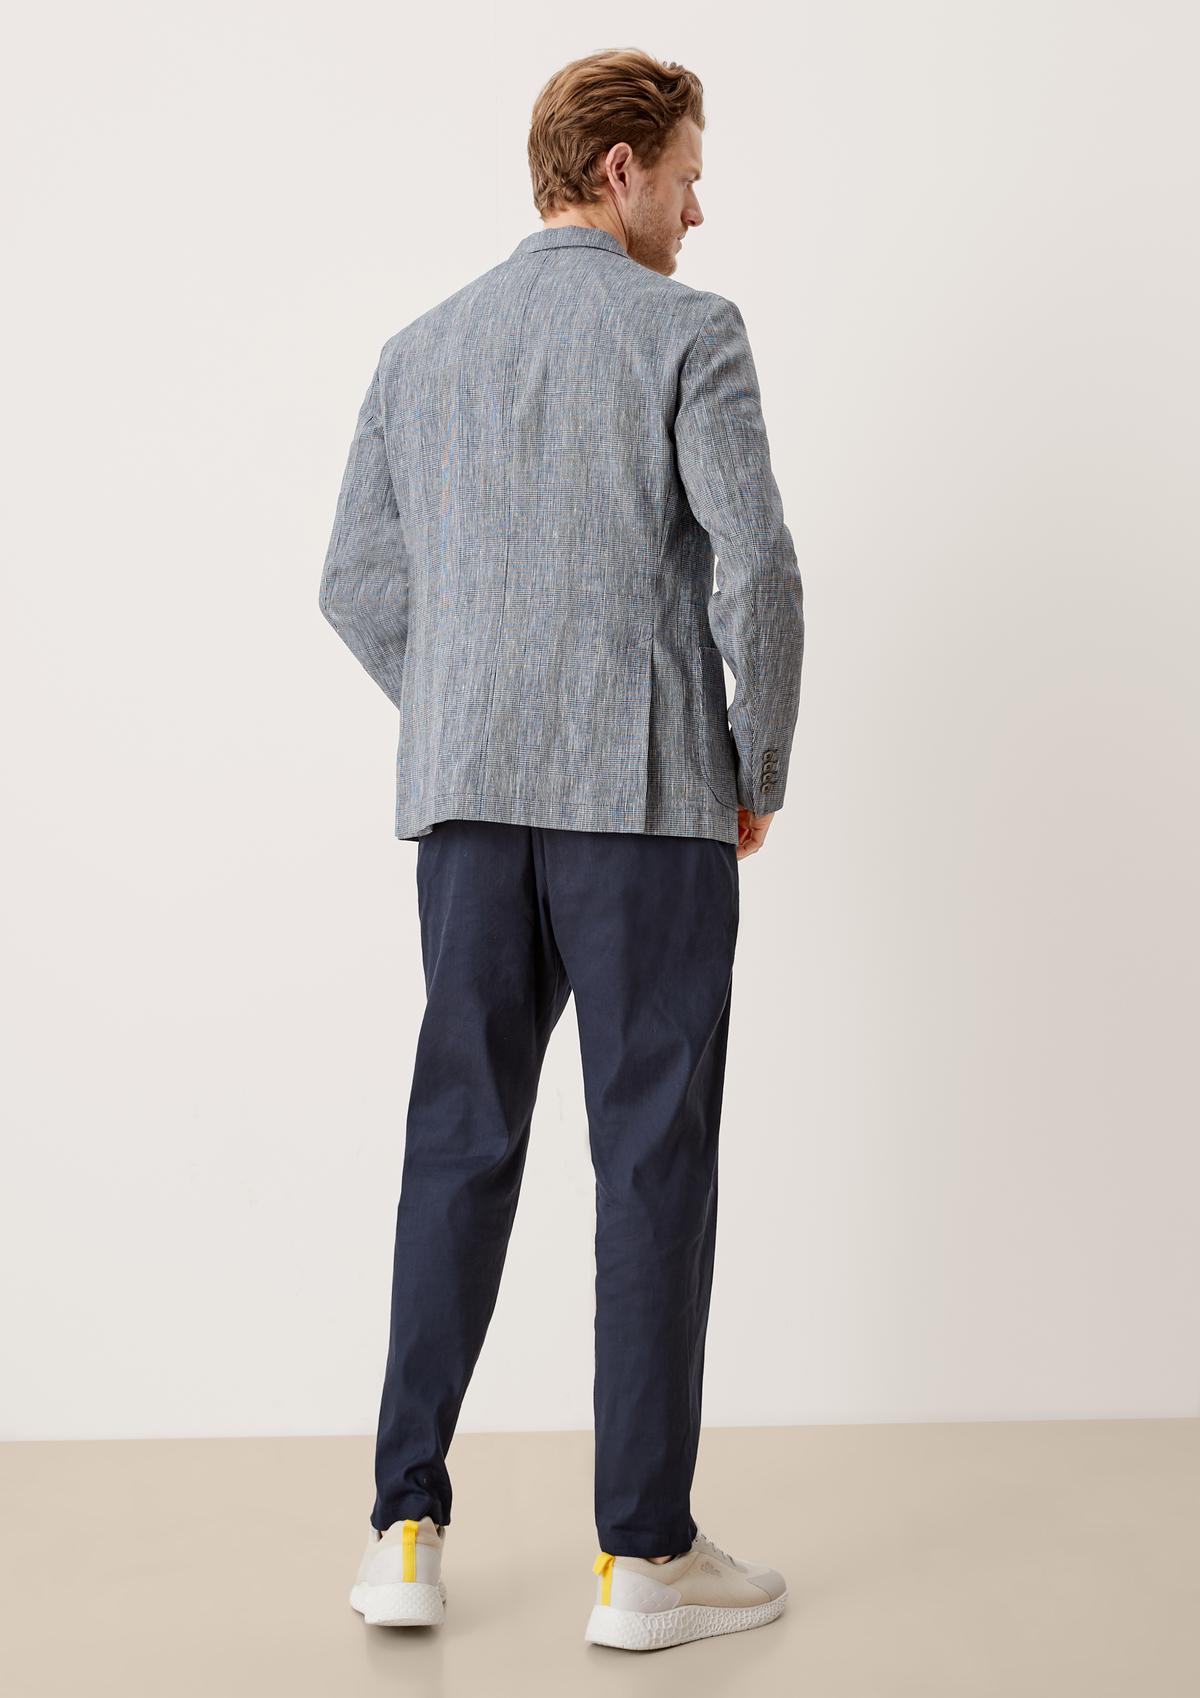 s.Oliver Linen tailored jacket with Prince of Wales check pattern